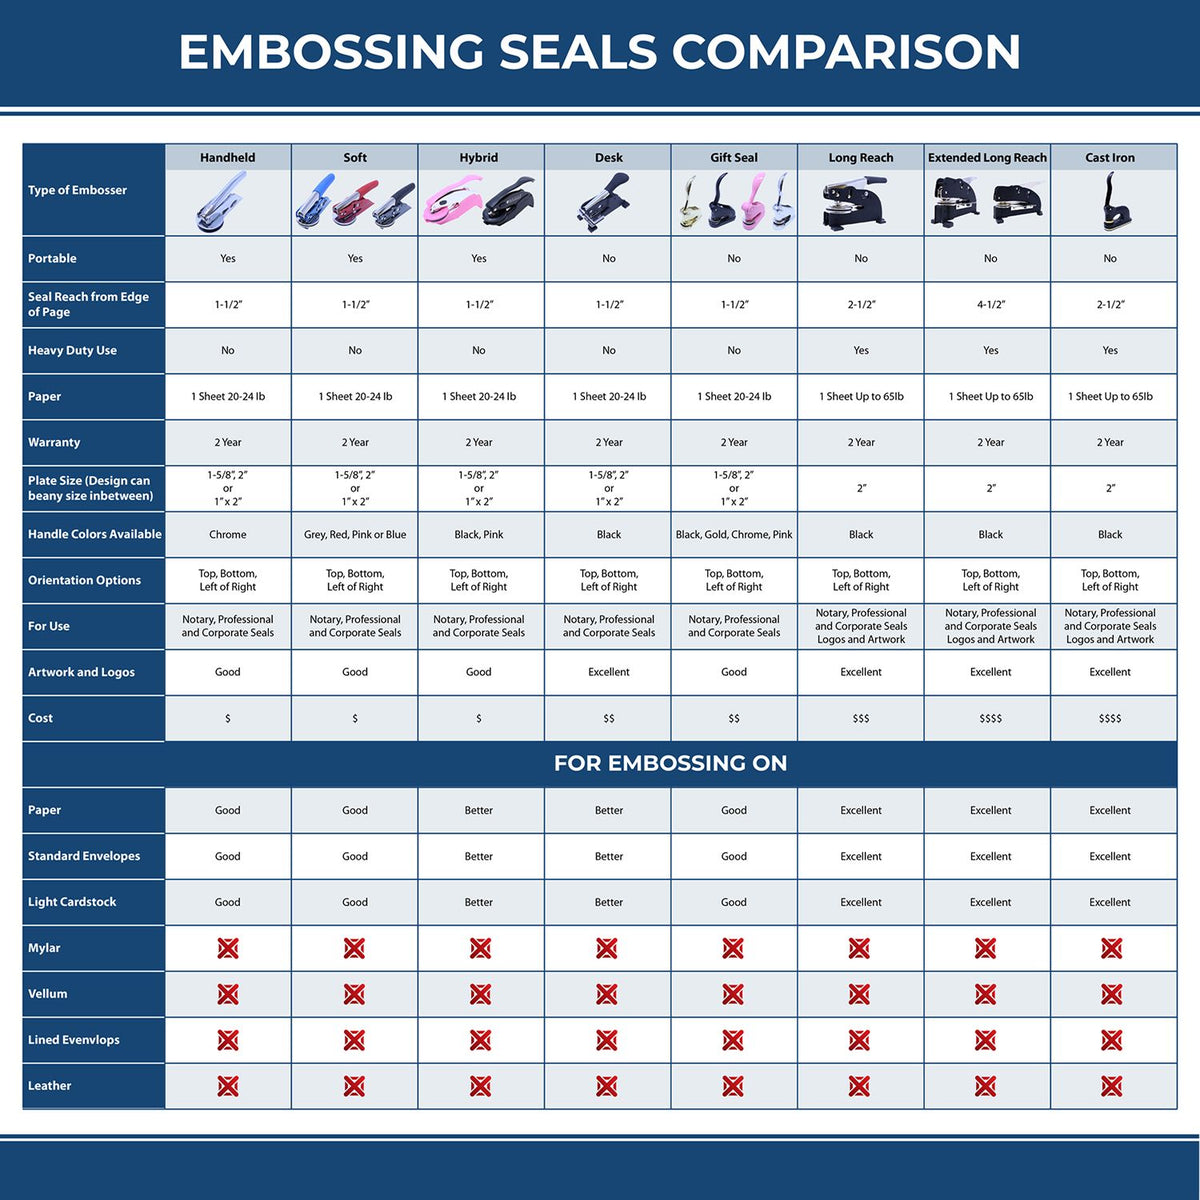 A comparison chart for the different types of mount models available for the State of Virginia Extended Long Reach Geologist Seal